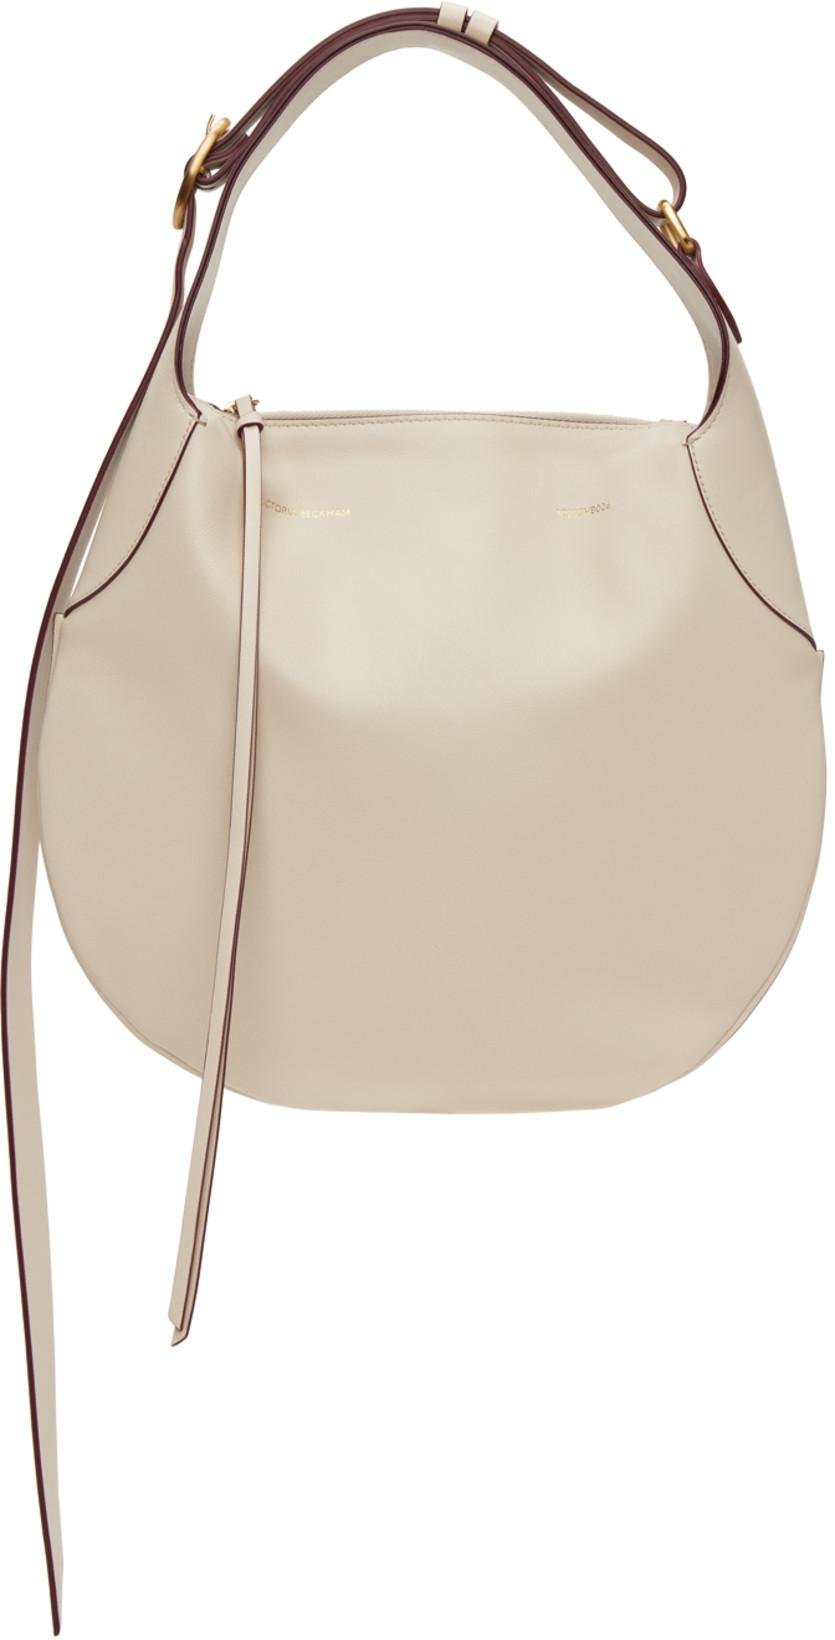 Off-White Small Half Moon Bag by VICTORIA BECKHAM